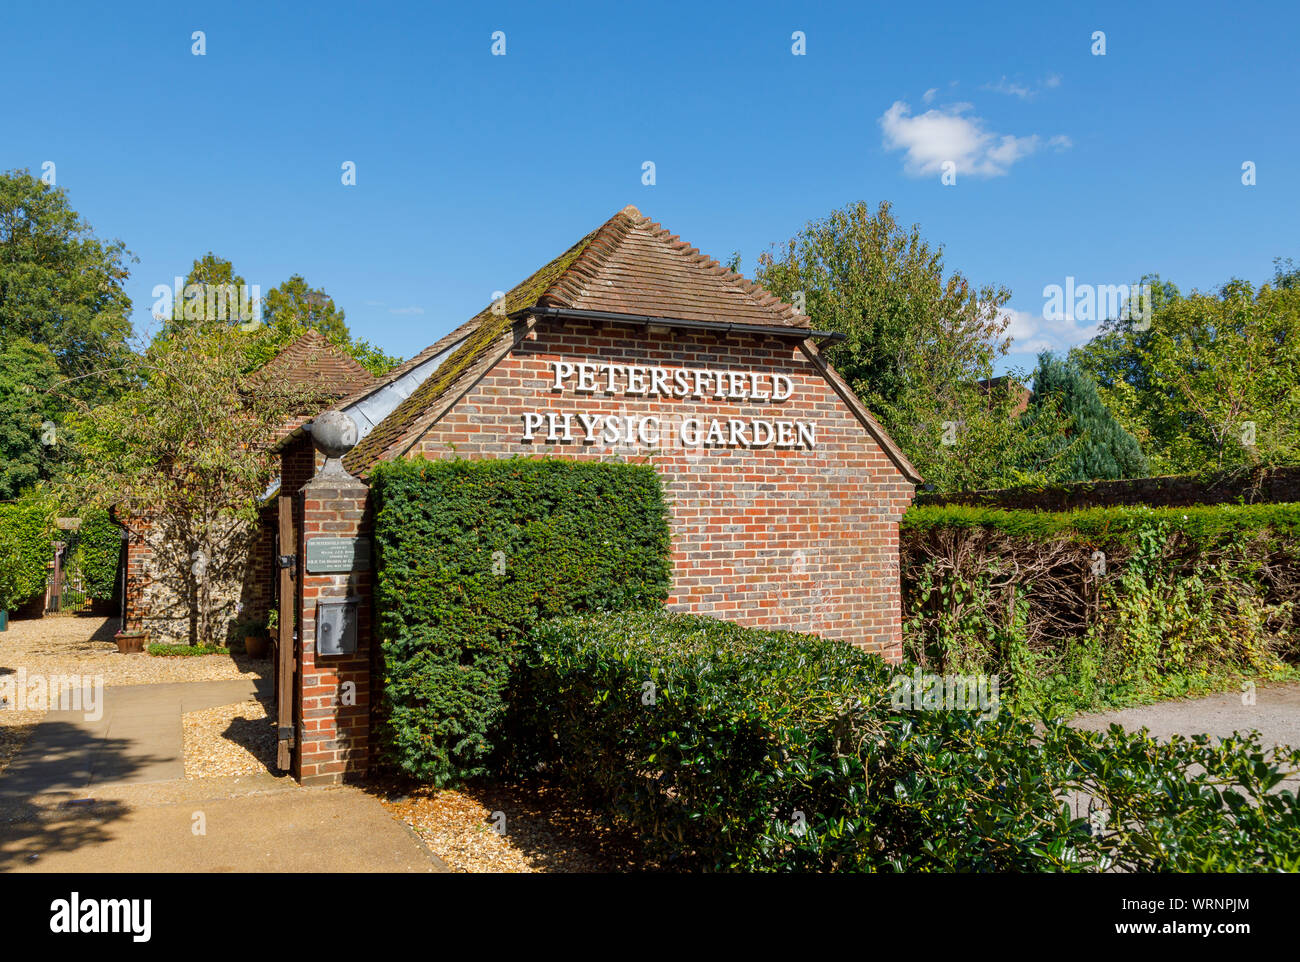 Entrance to the Petersfield Physic Garden, a botanical herb garden of medicinal plants open to the public in Petersfield, Hampshire, southern England Stock Photo